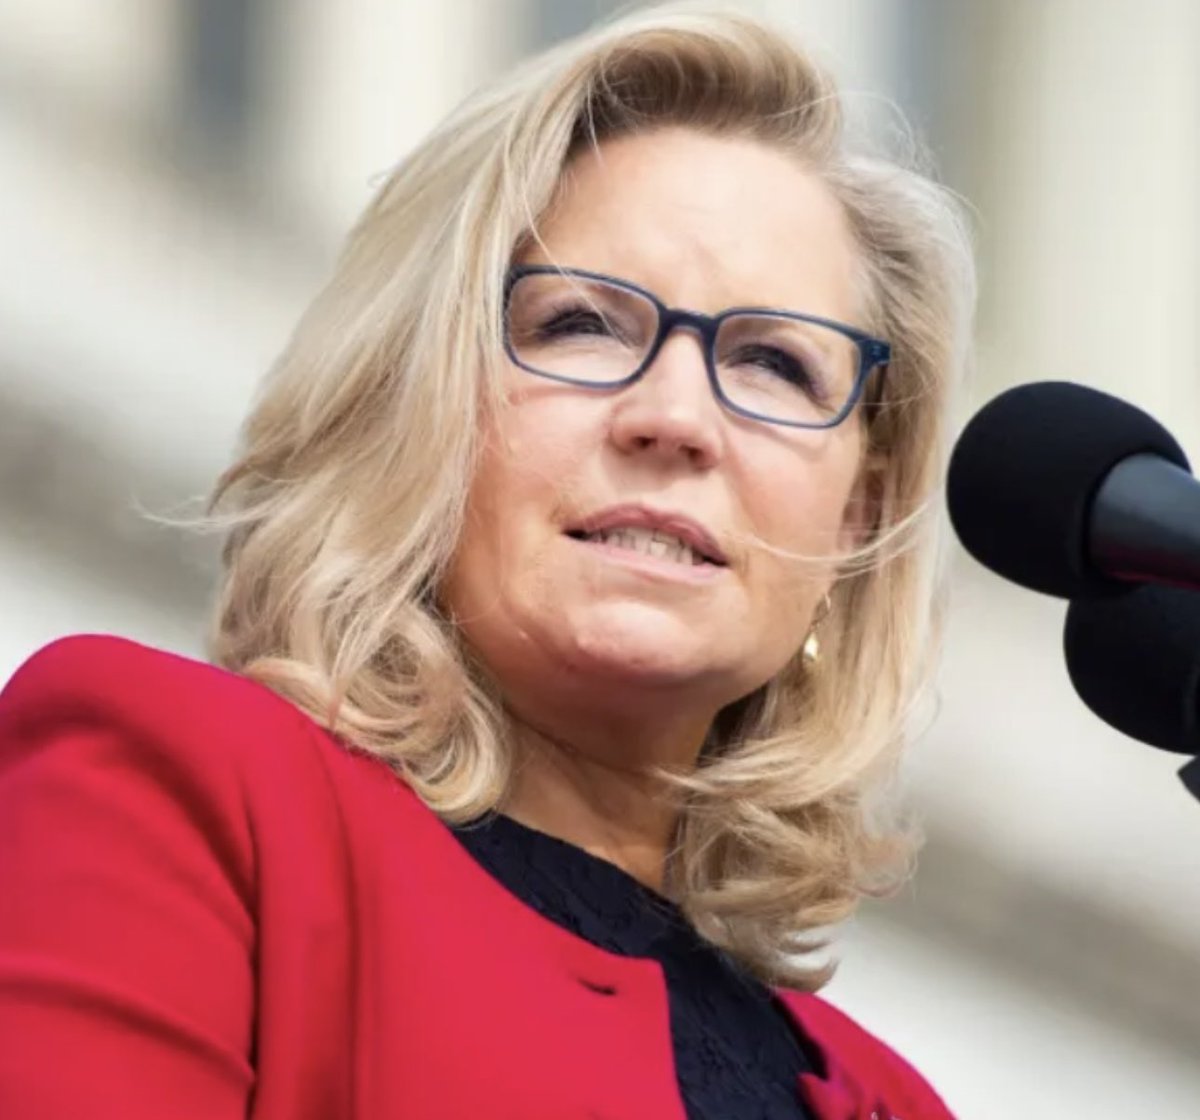 Liz Cheney says “Donald Trump has proven he is unfit for office.” “He is a risk America can never take again.” Drop a 💙 and Repost if you agree with Liz!